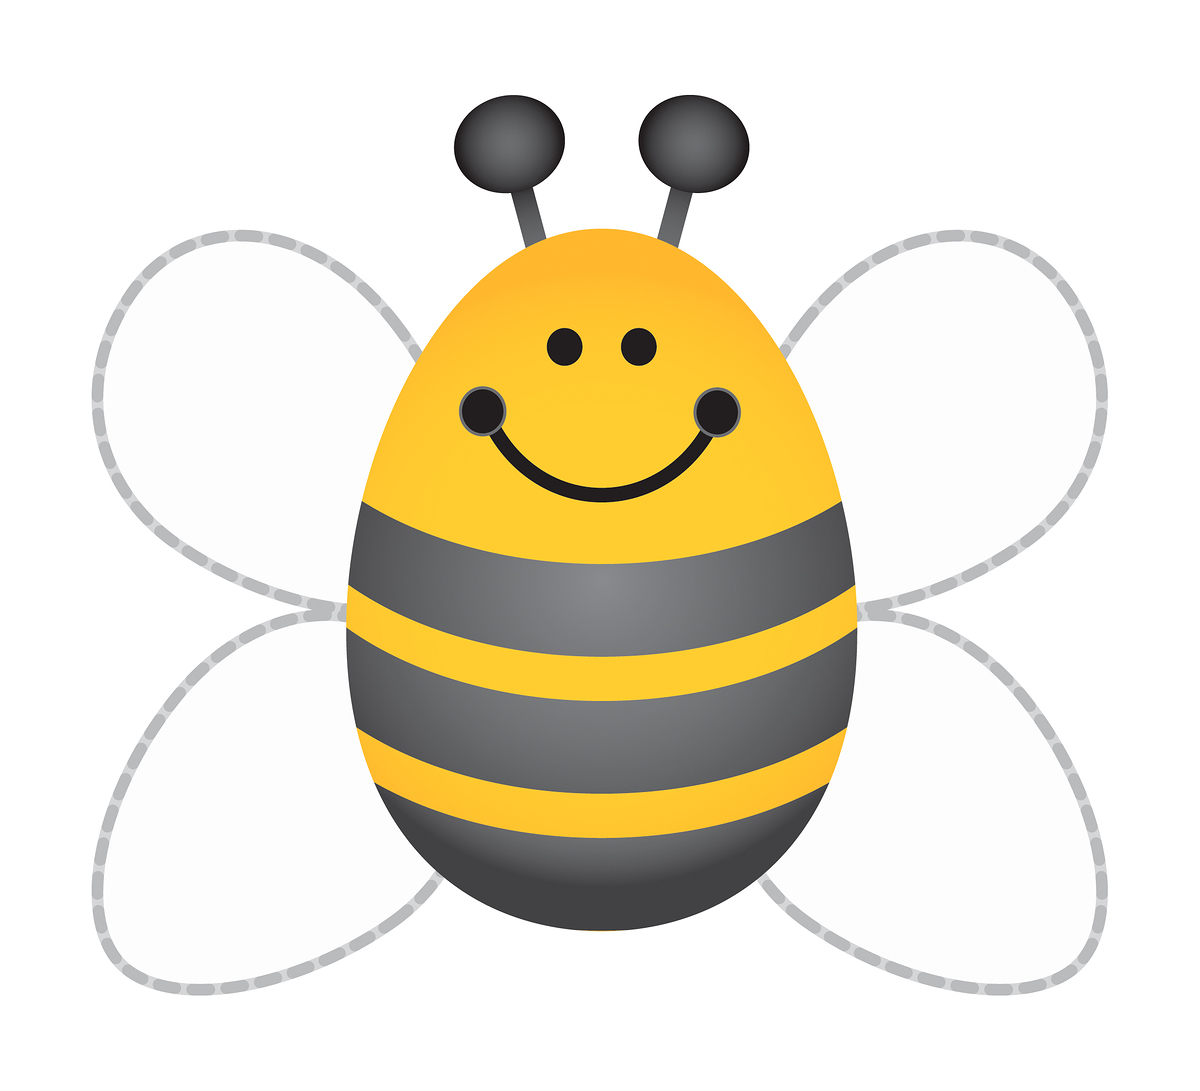 Bumble Bee Clip Art Free - ClipArt Best